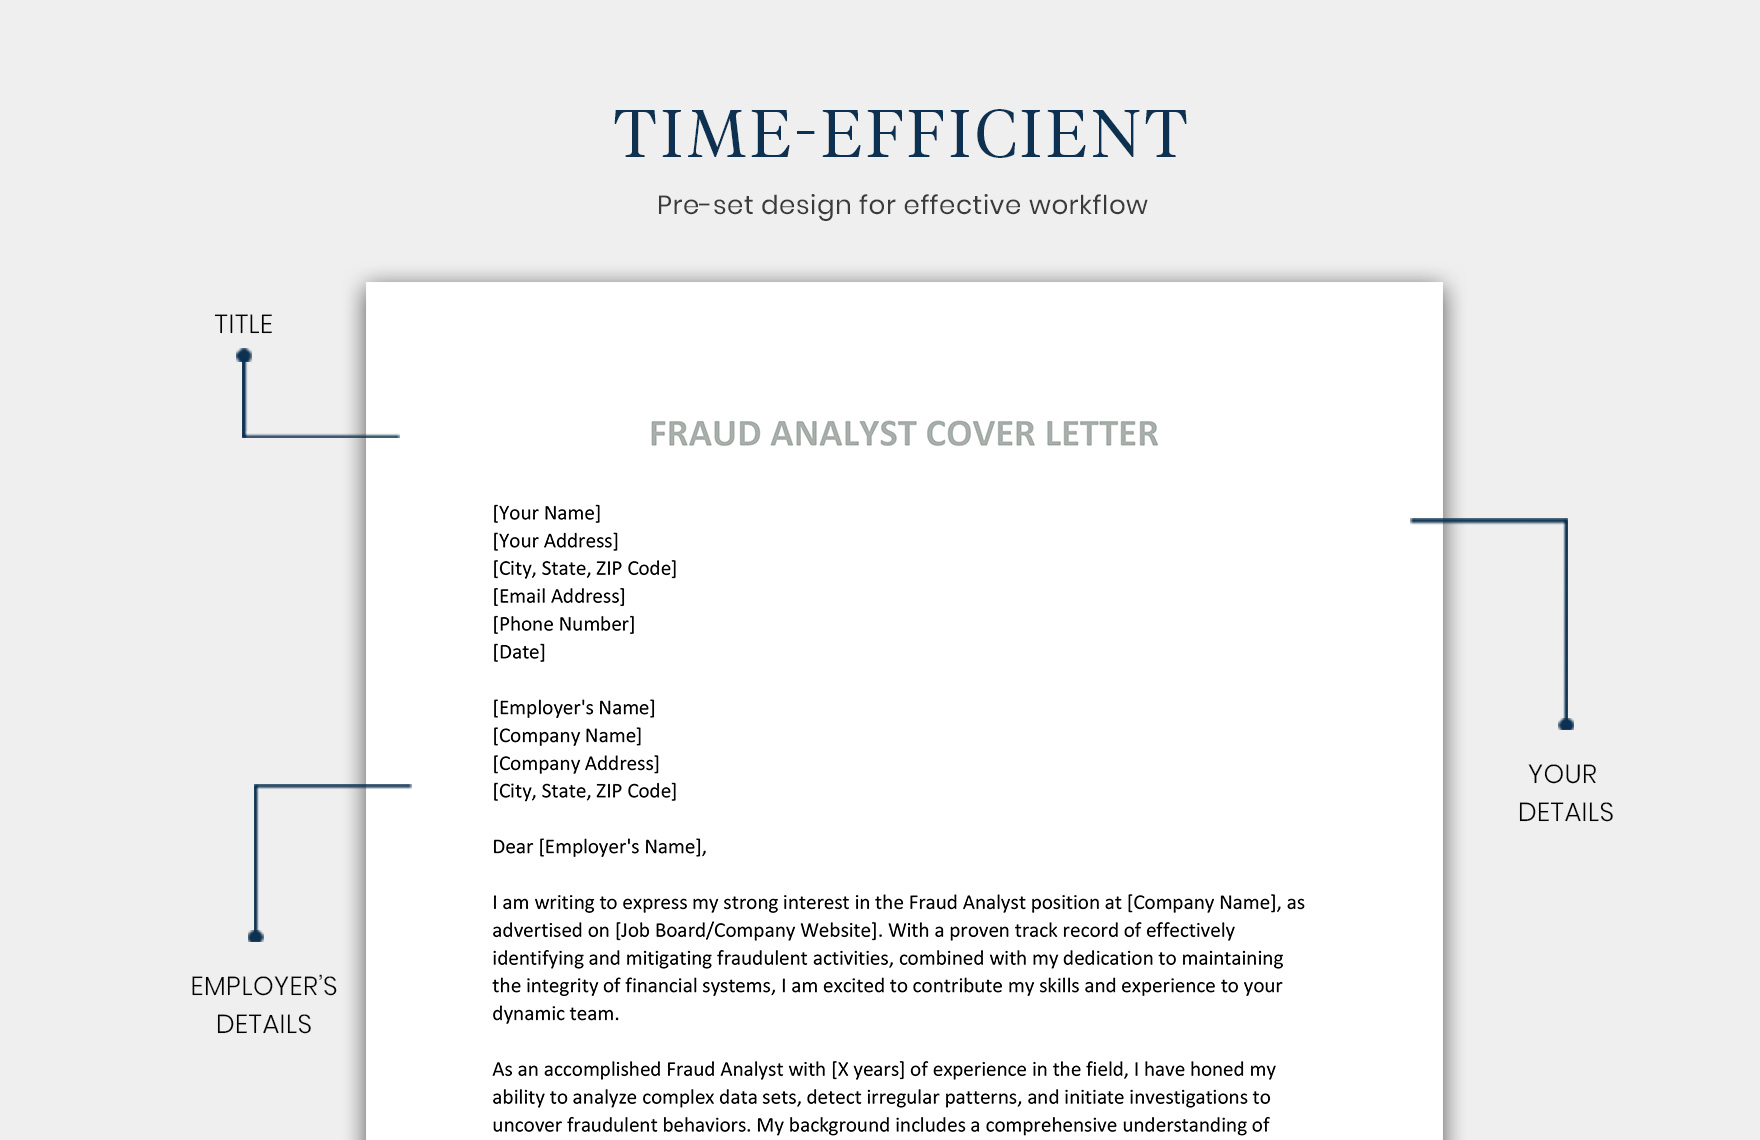 Fraud Analyst Cover Letter